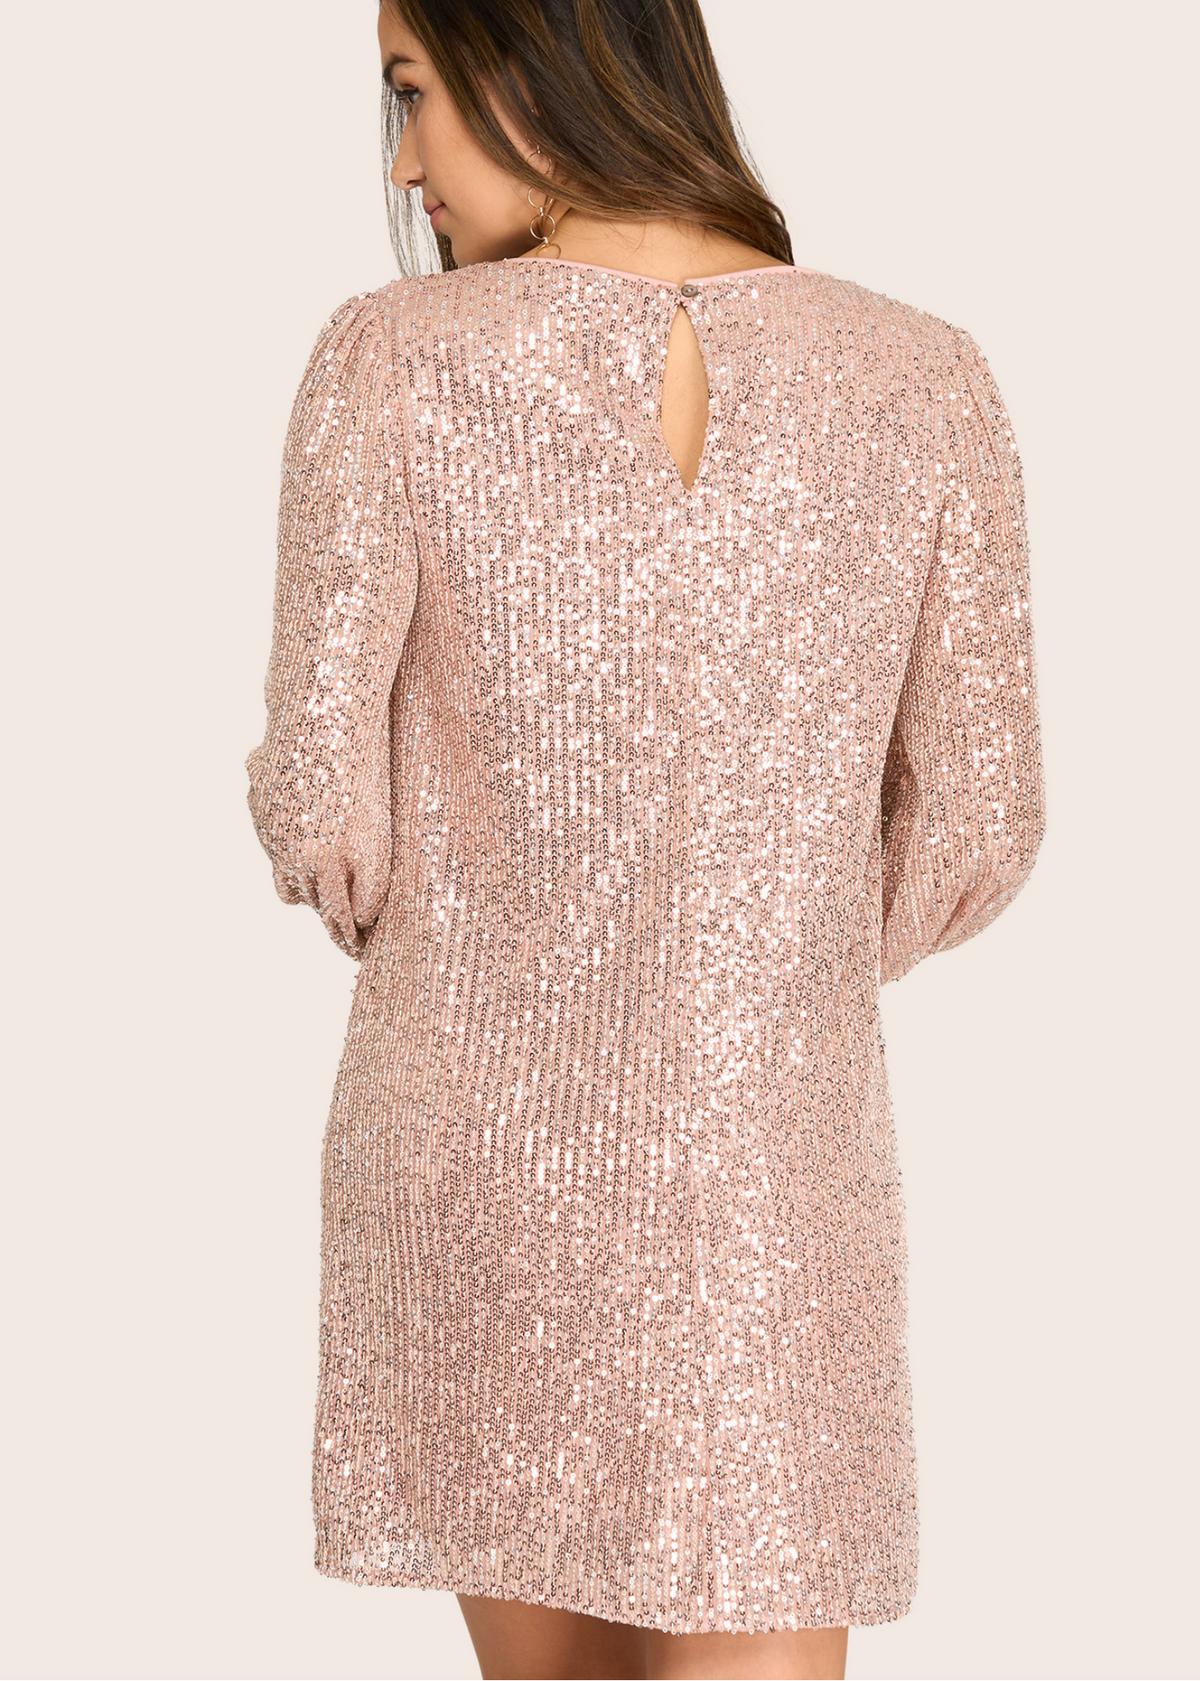 Champagne Kiss - Sequin Round Neck Mini Dress with Long Sleeves